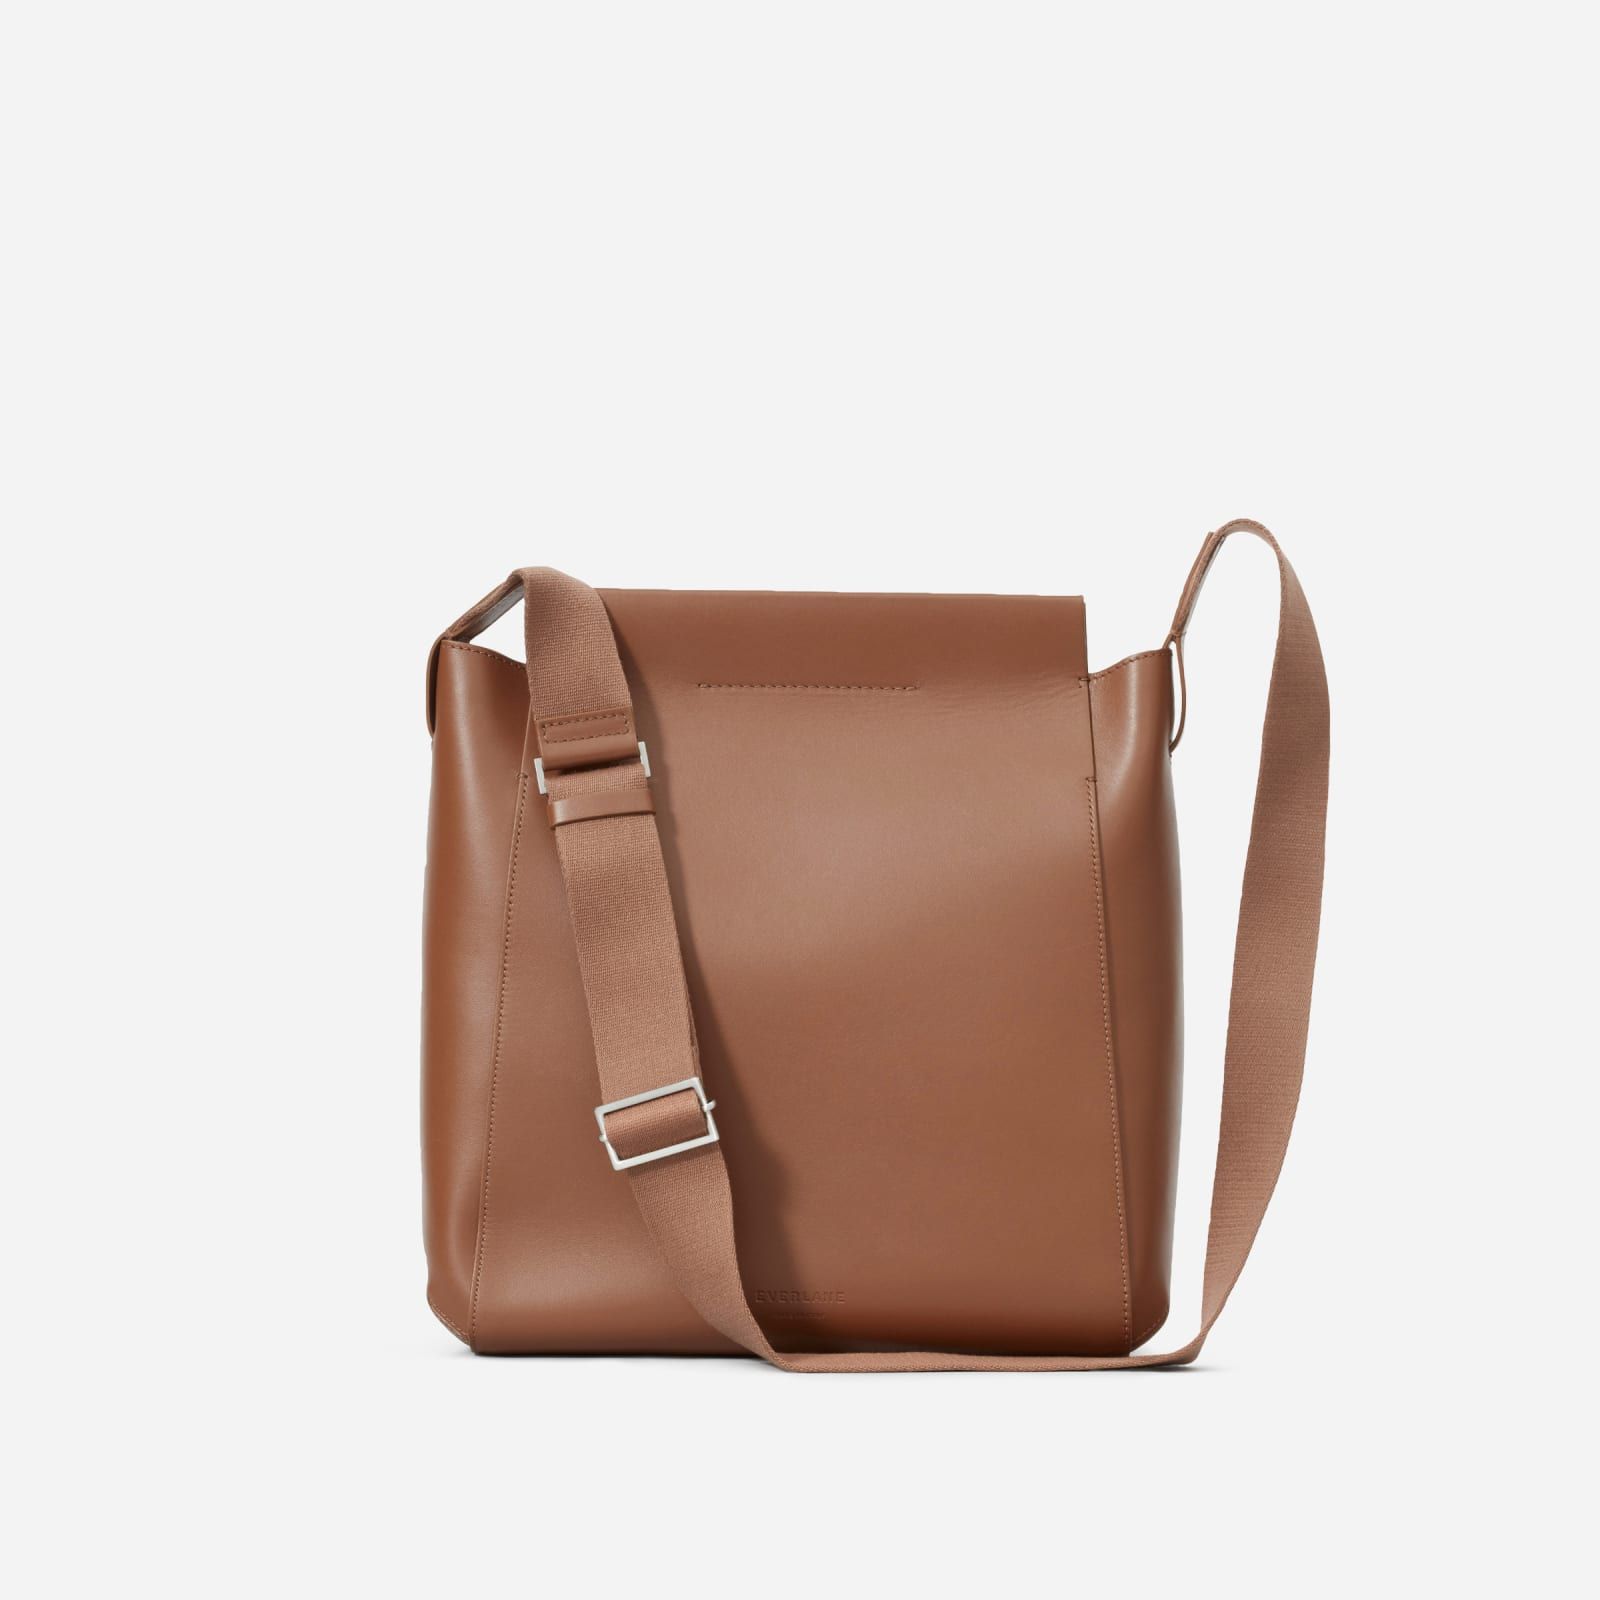 Women's Leather Messenger Bag by Everlane in Cognac | Everlane